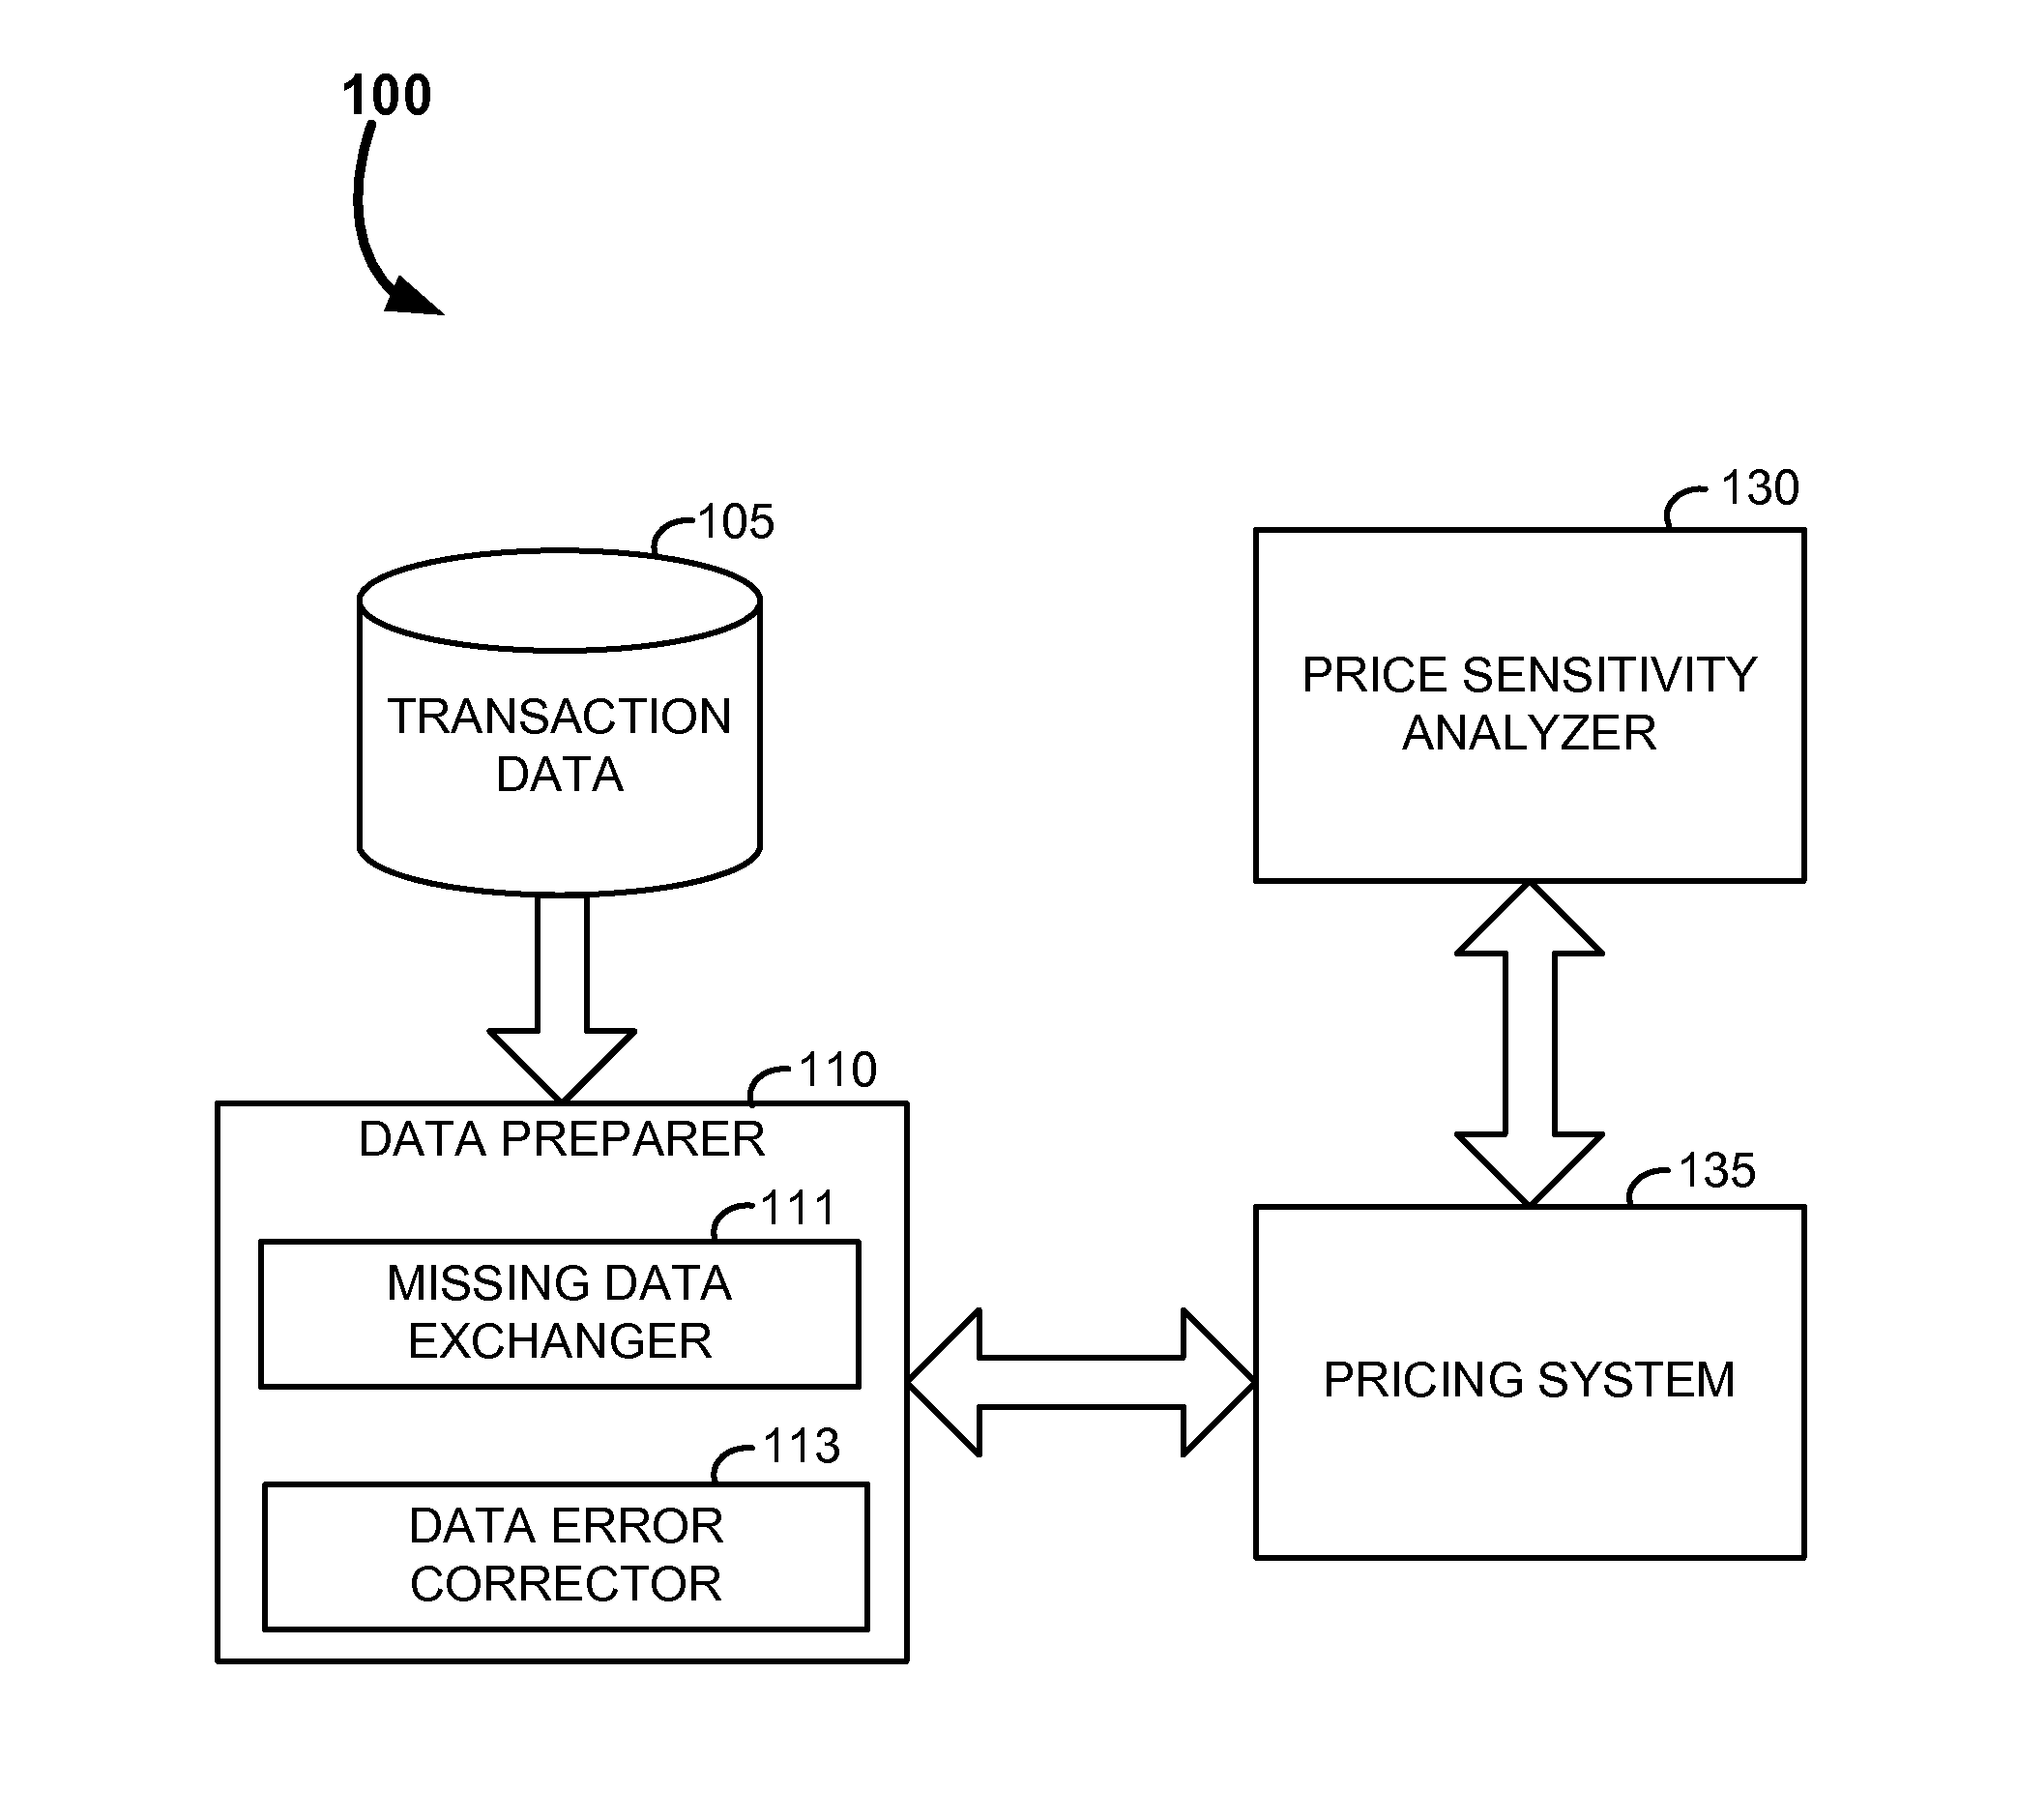 System and Methods for Generating Price Sensitivity